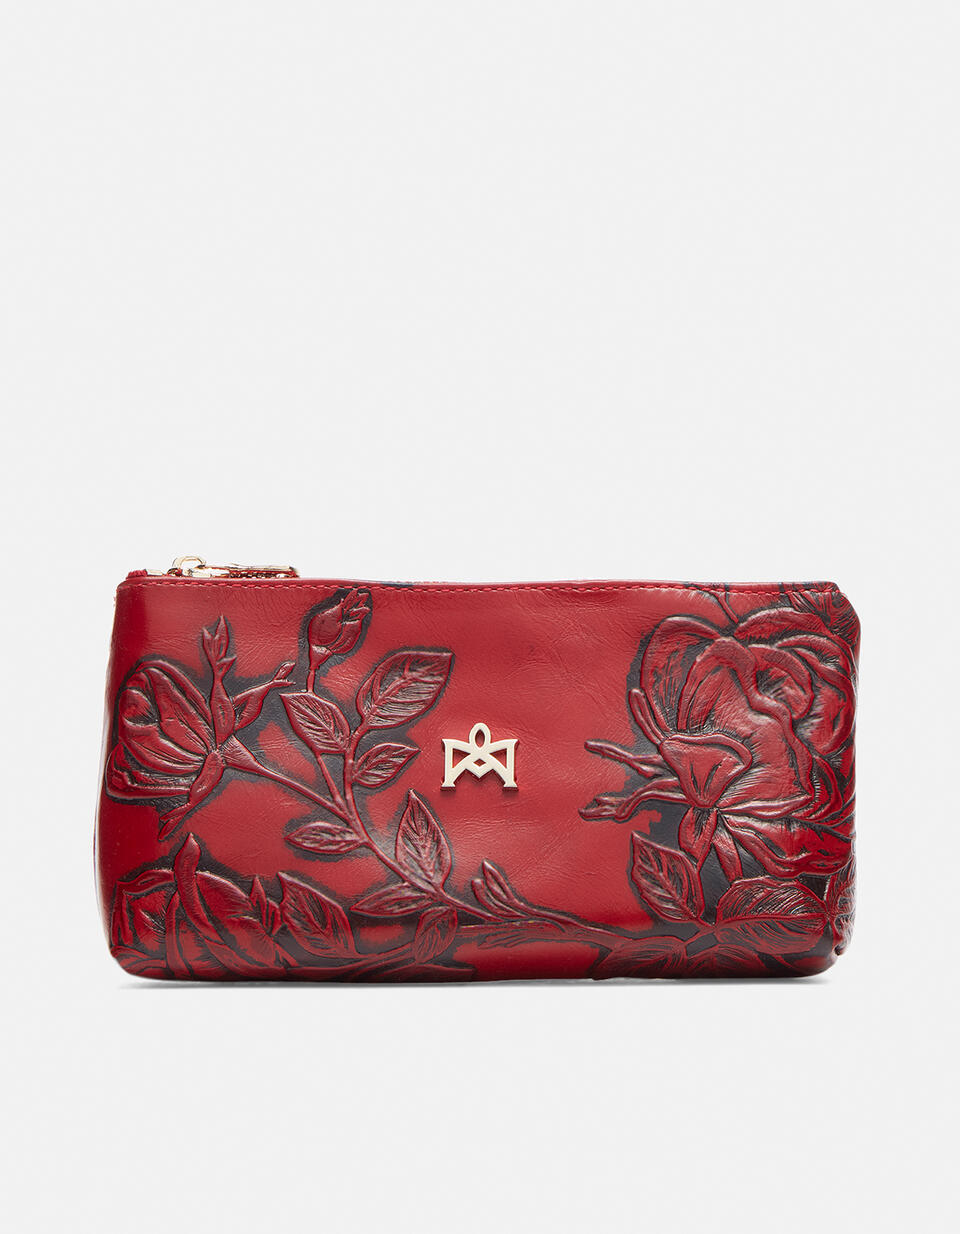 Key pouch Red  - Key Holders - Women's Accessories - Accessories - Cuoieria Fiorentina